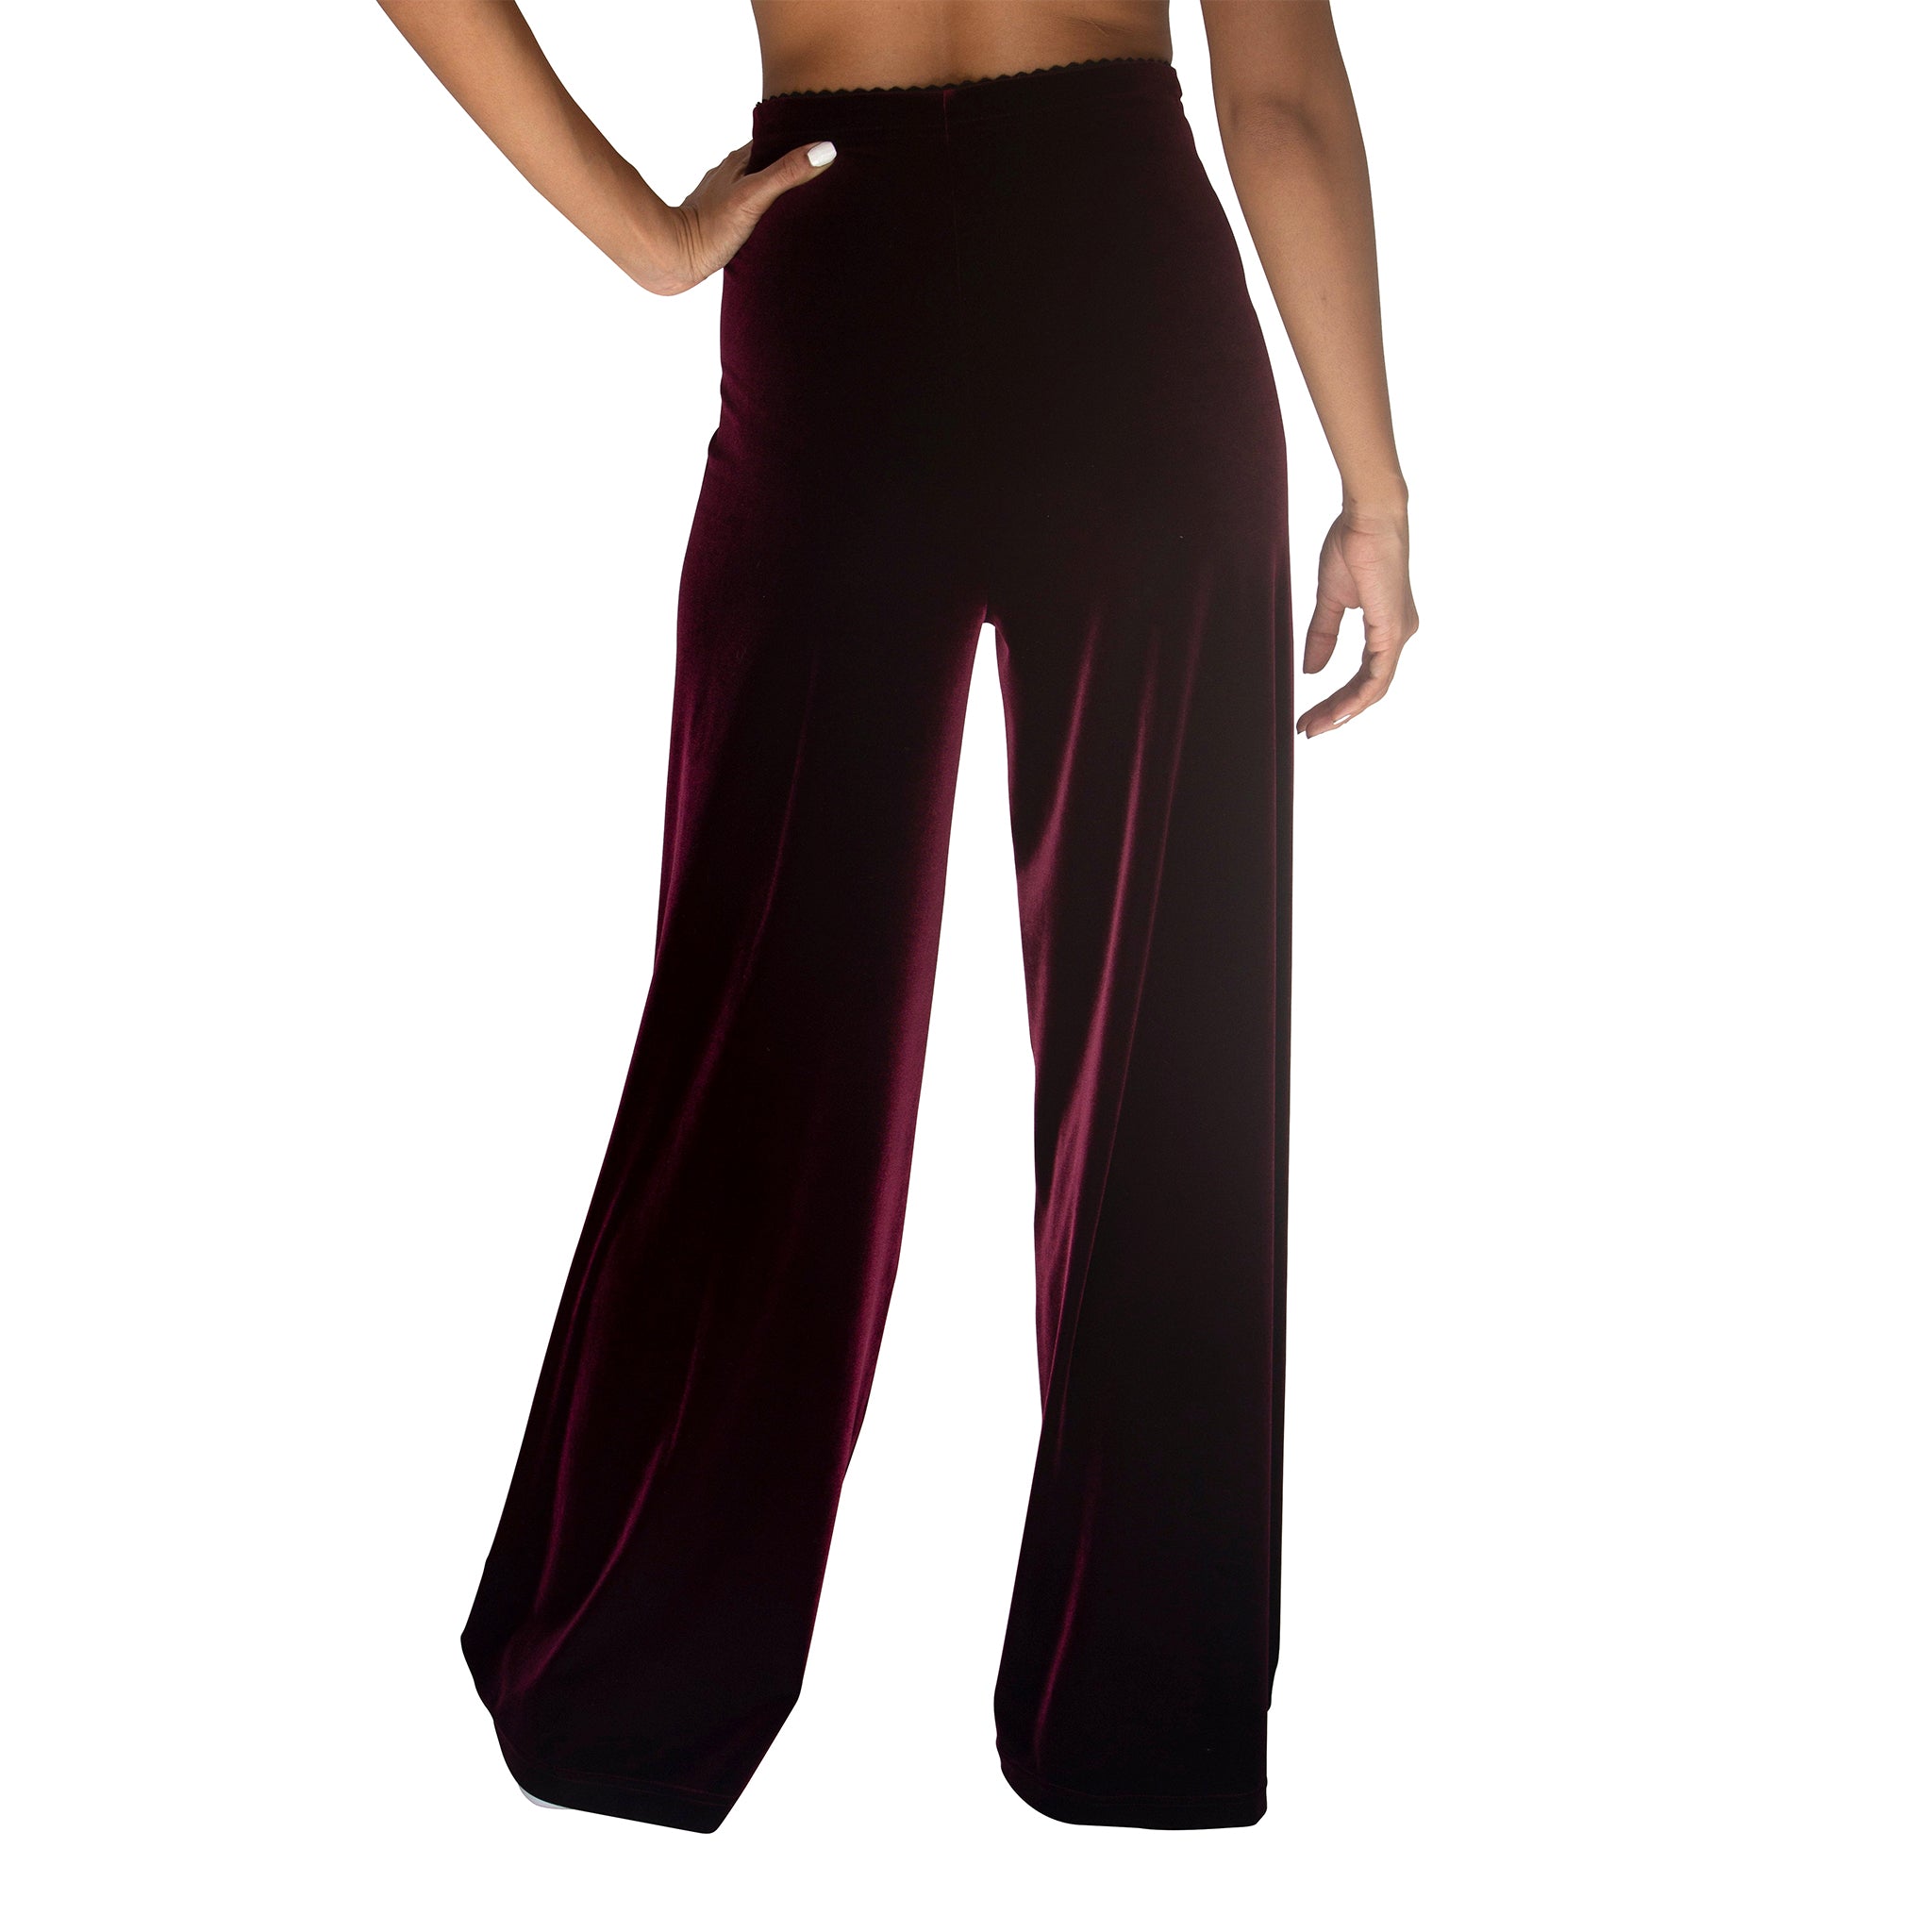 Back view of our Stretch Velvet Pant in Sangria Wine (Burgundy) has elastic waist and 32" inseam